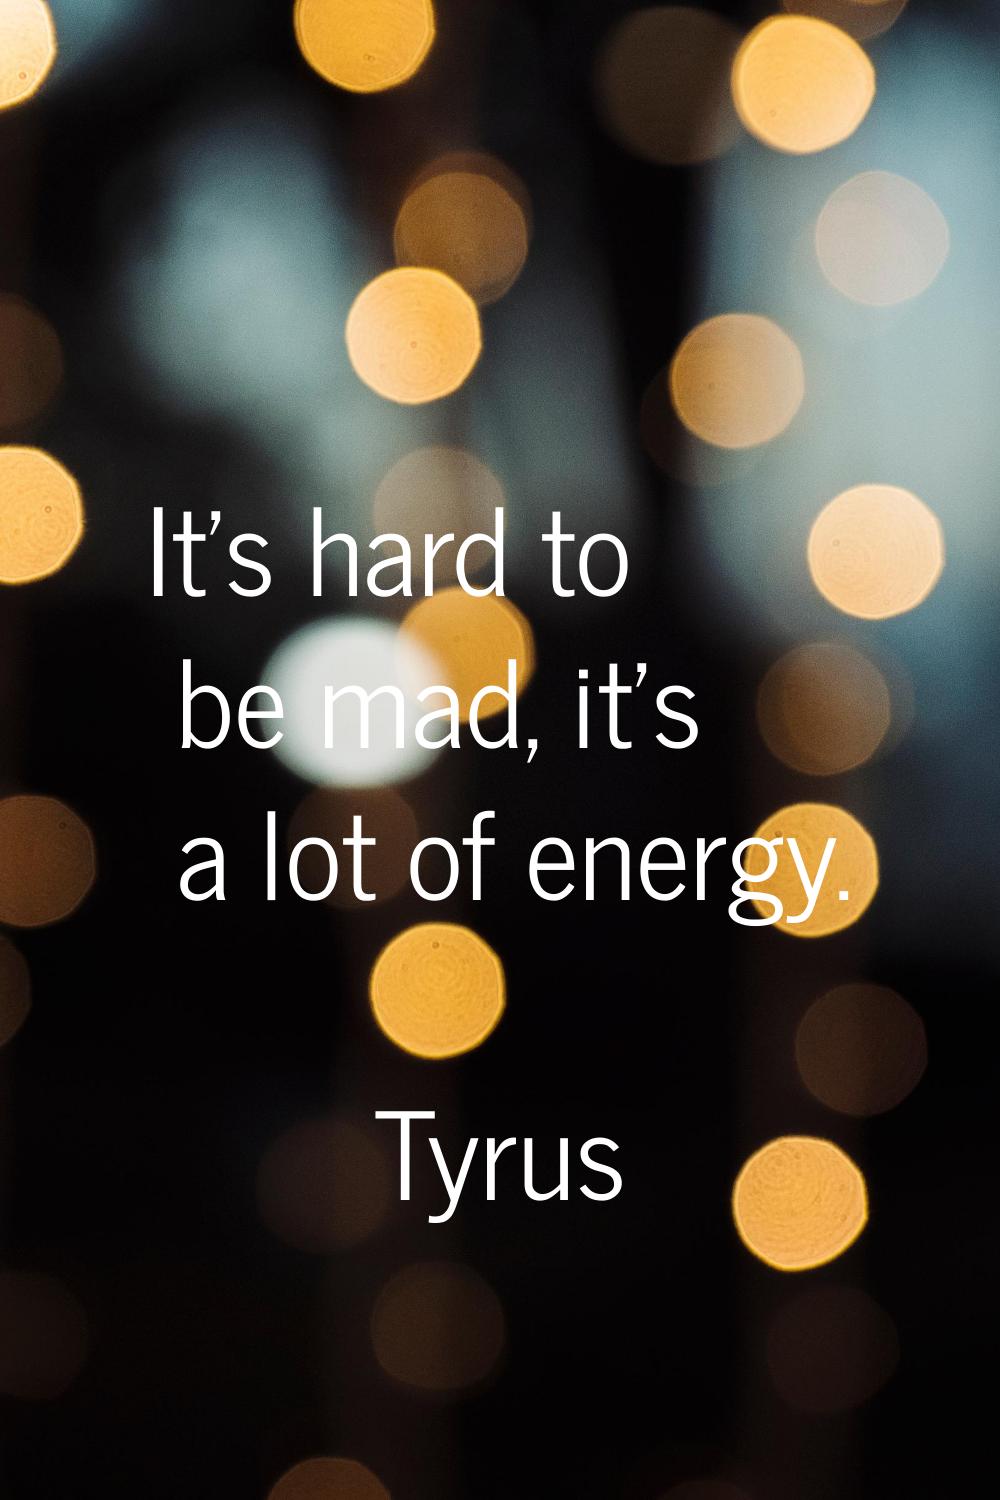 It's hard to be mad, it's a lot of energy.